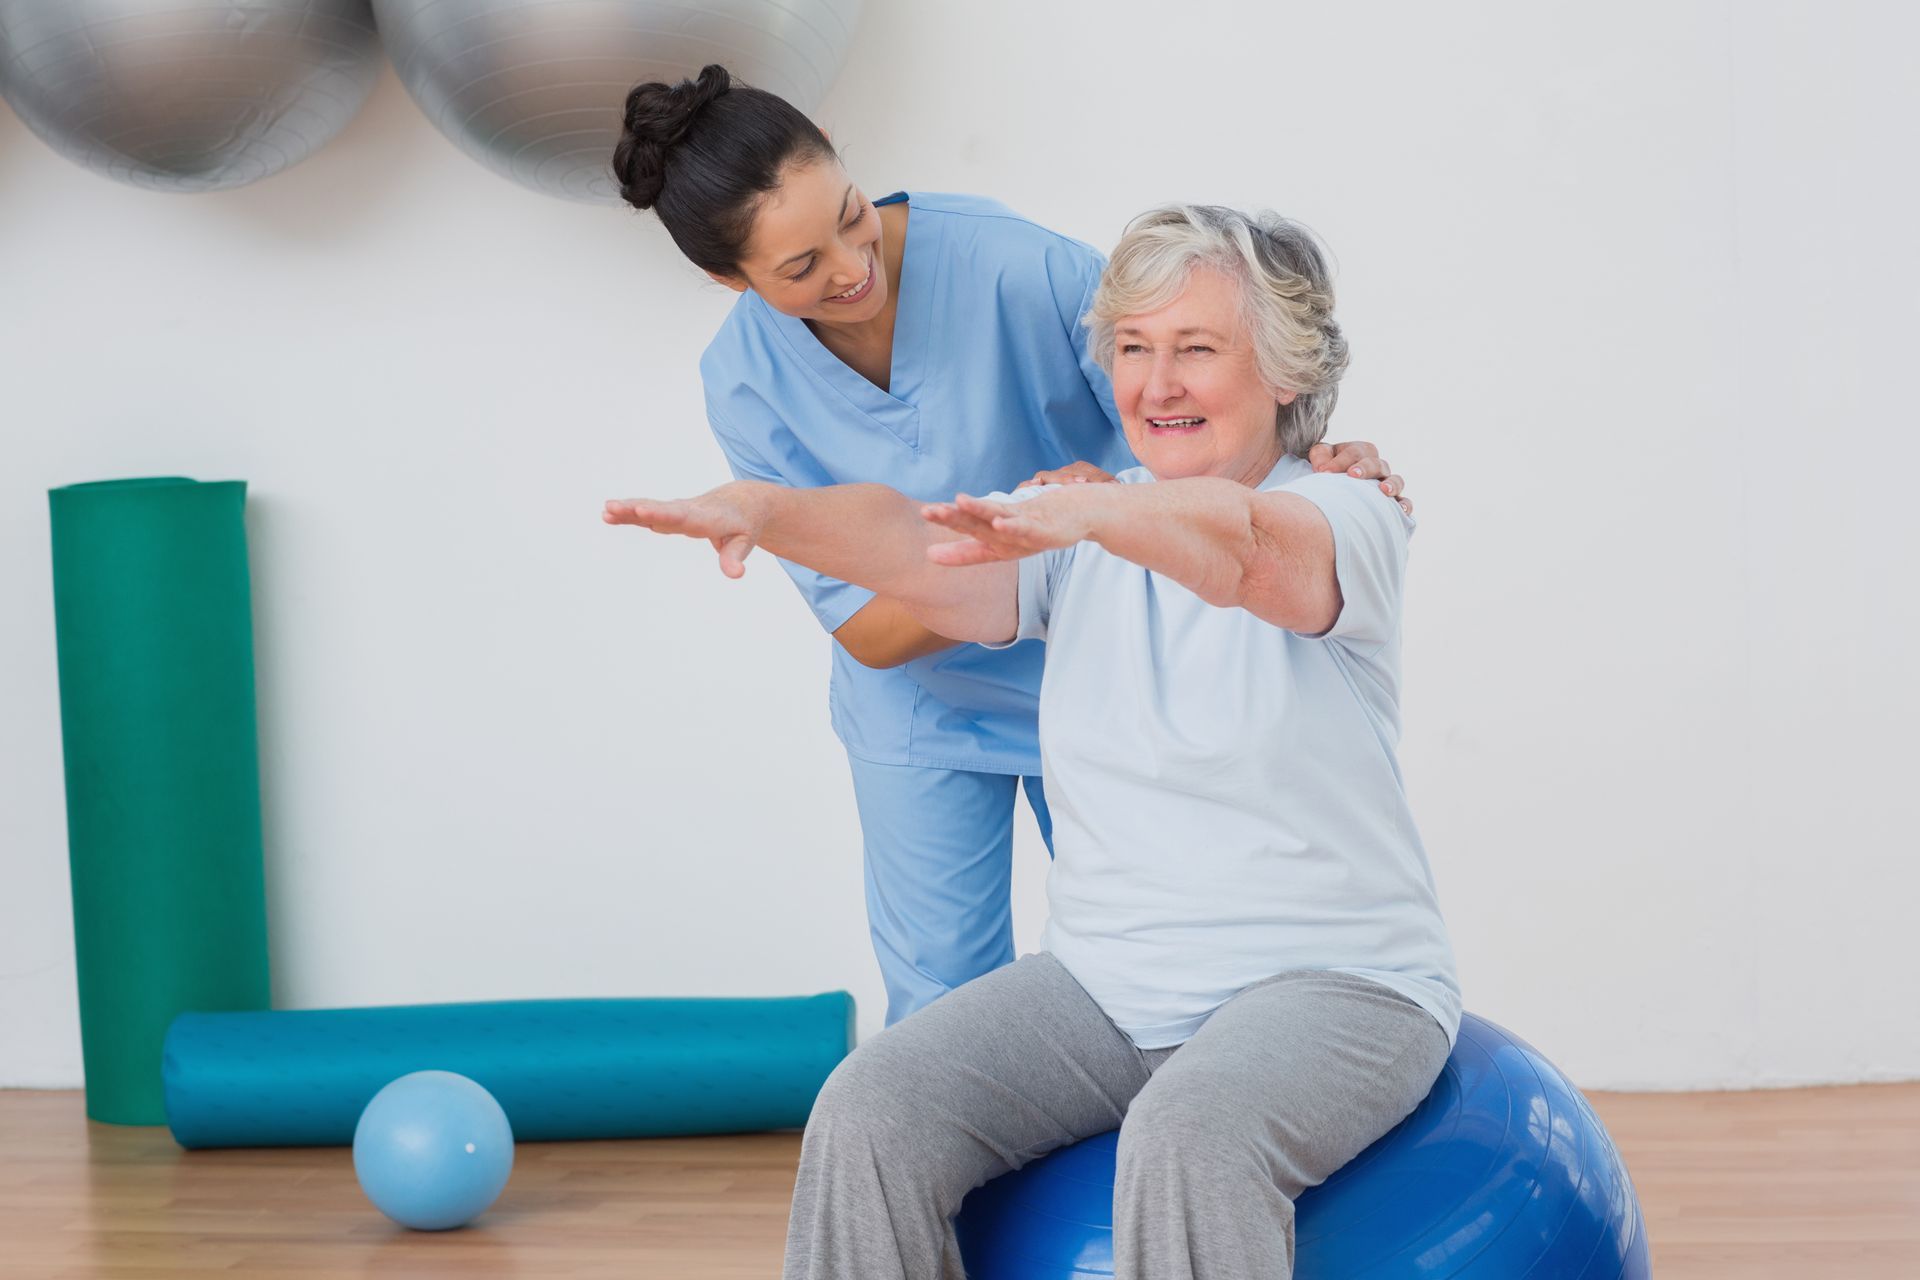 an elderly woman sits on a blue exercise ball while a nurse helps her